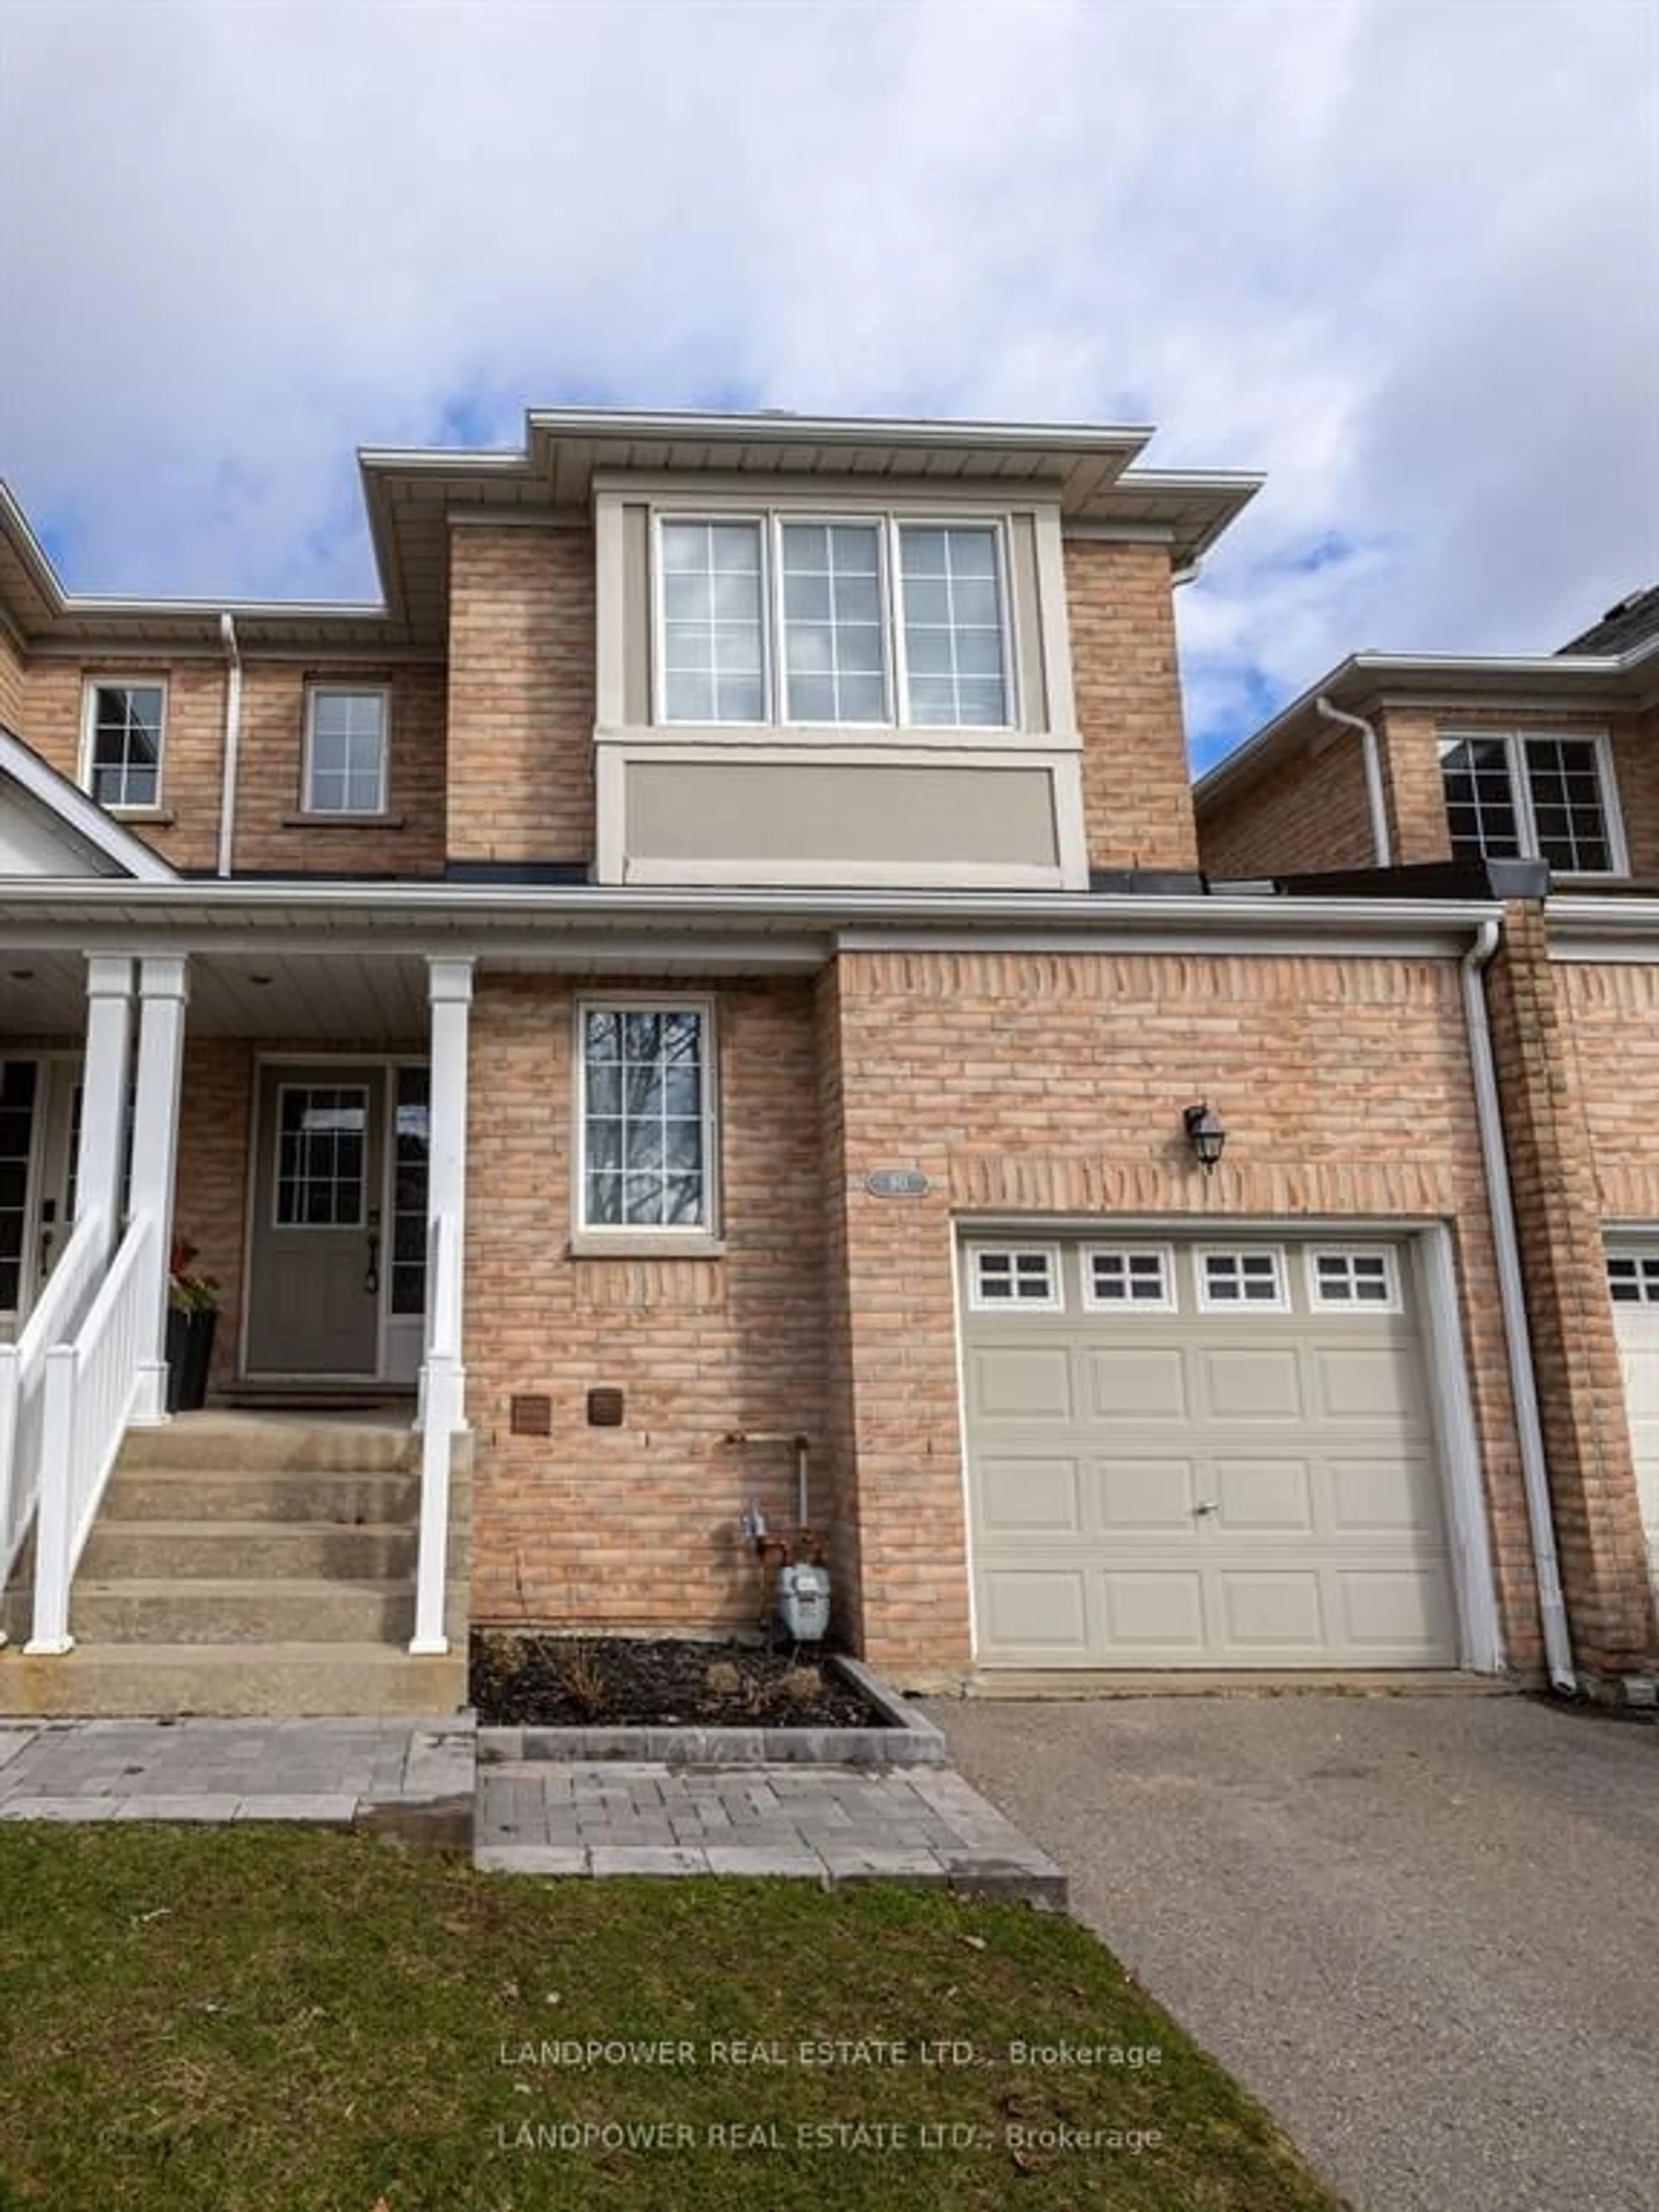 Home with brick exterior material for 90 Lowther Ave, Richmond Hill Ontario L4E 4P3